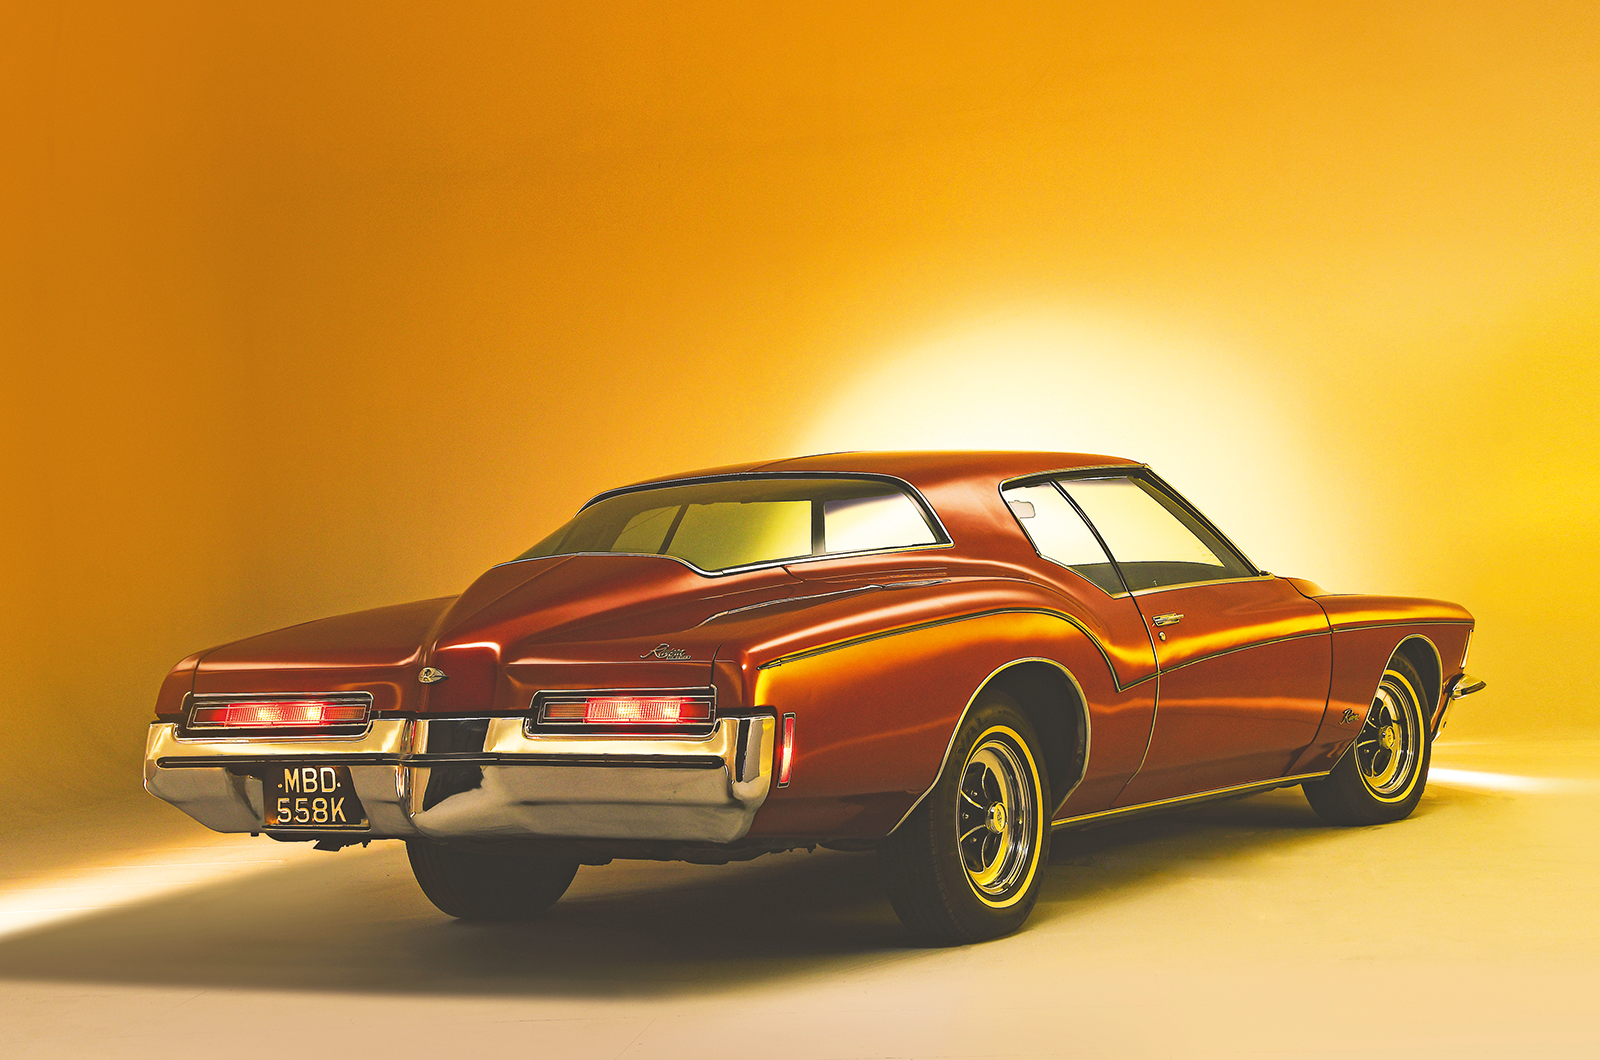 Classic & Sports Car – Gangster’s paradise: reappraising Buick’s controversial ’71-’73 Riviera